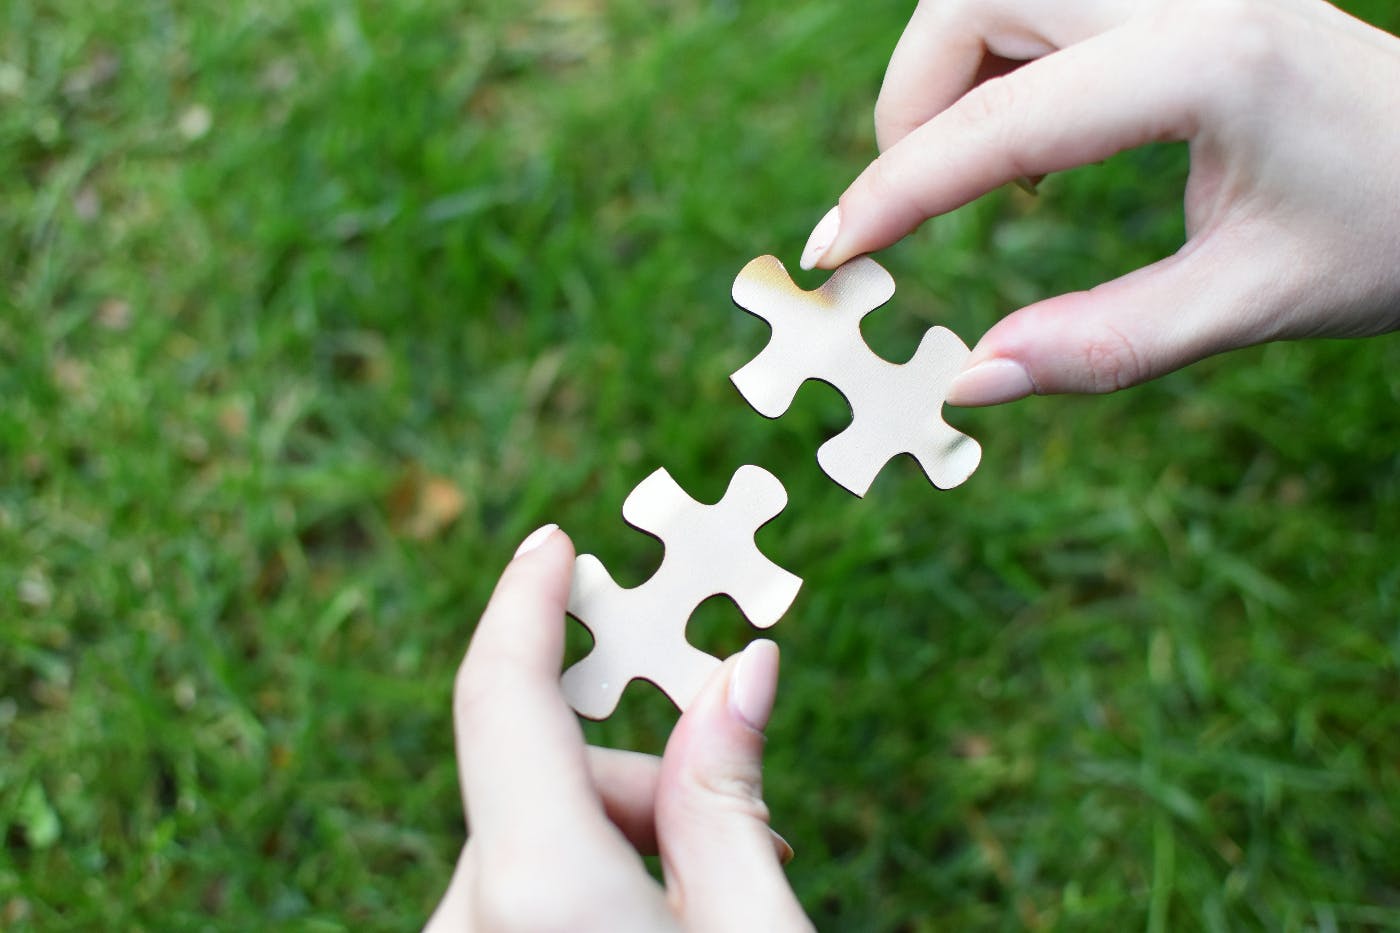 A woman's hands holding two puzzle pieces that obviously go together